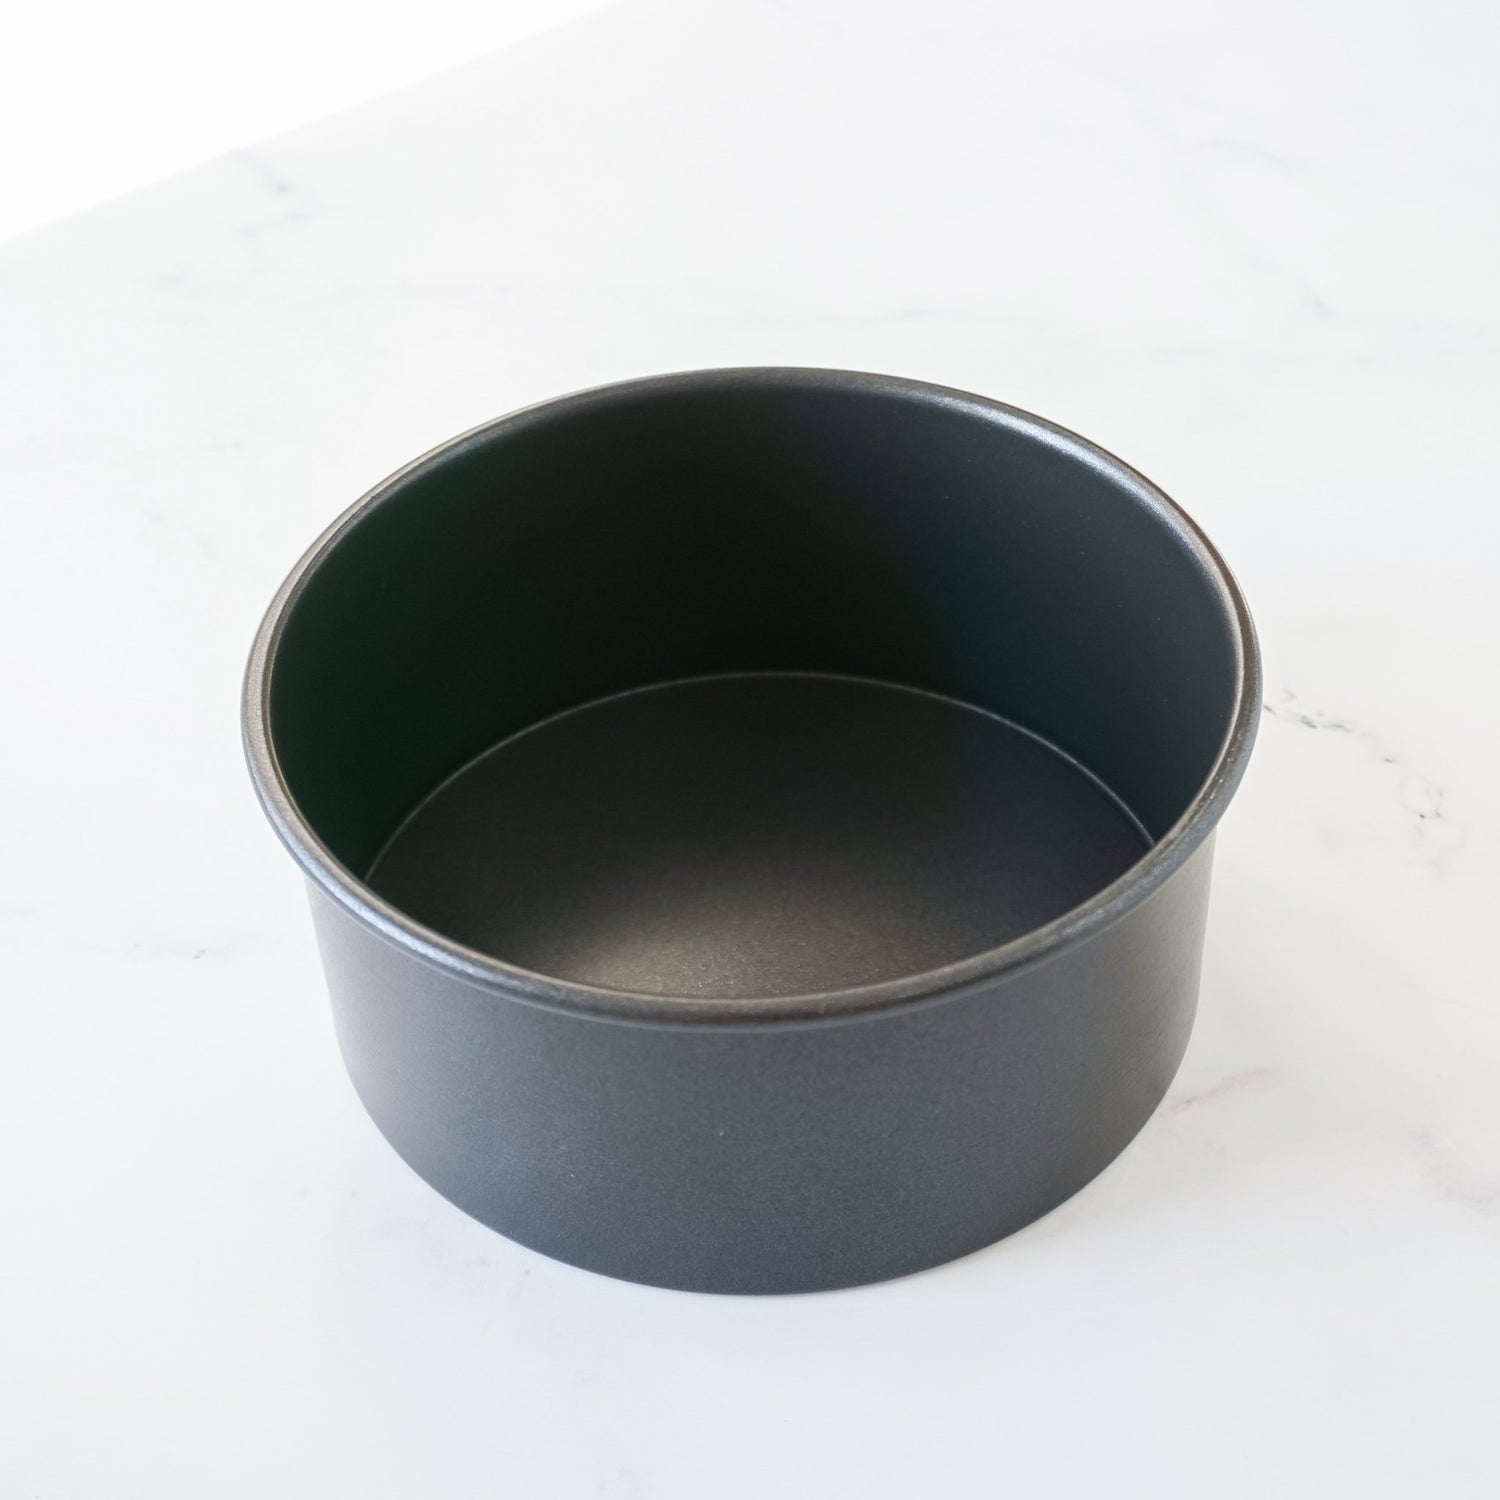 6 inch round cake pan with removable bottom